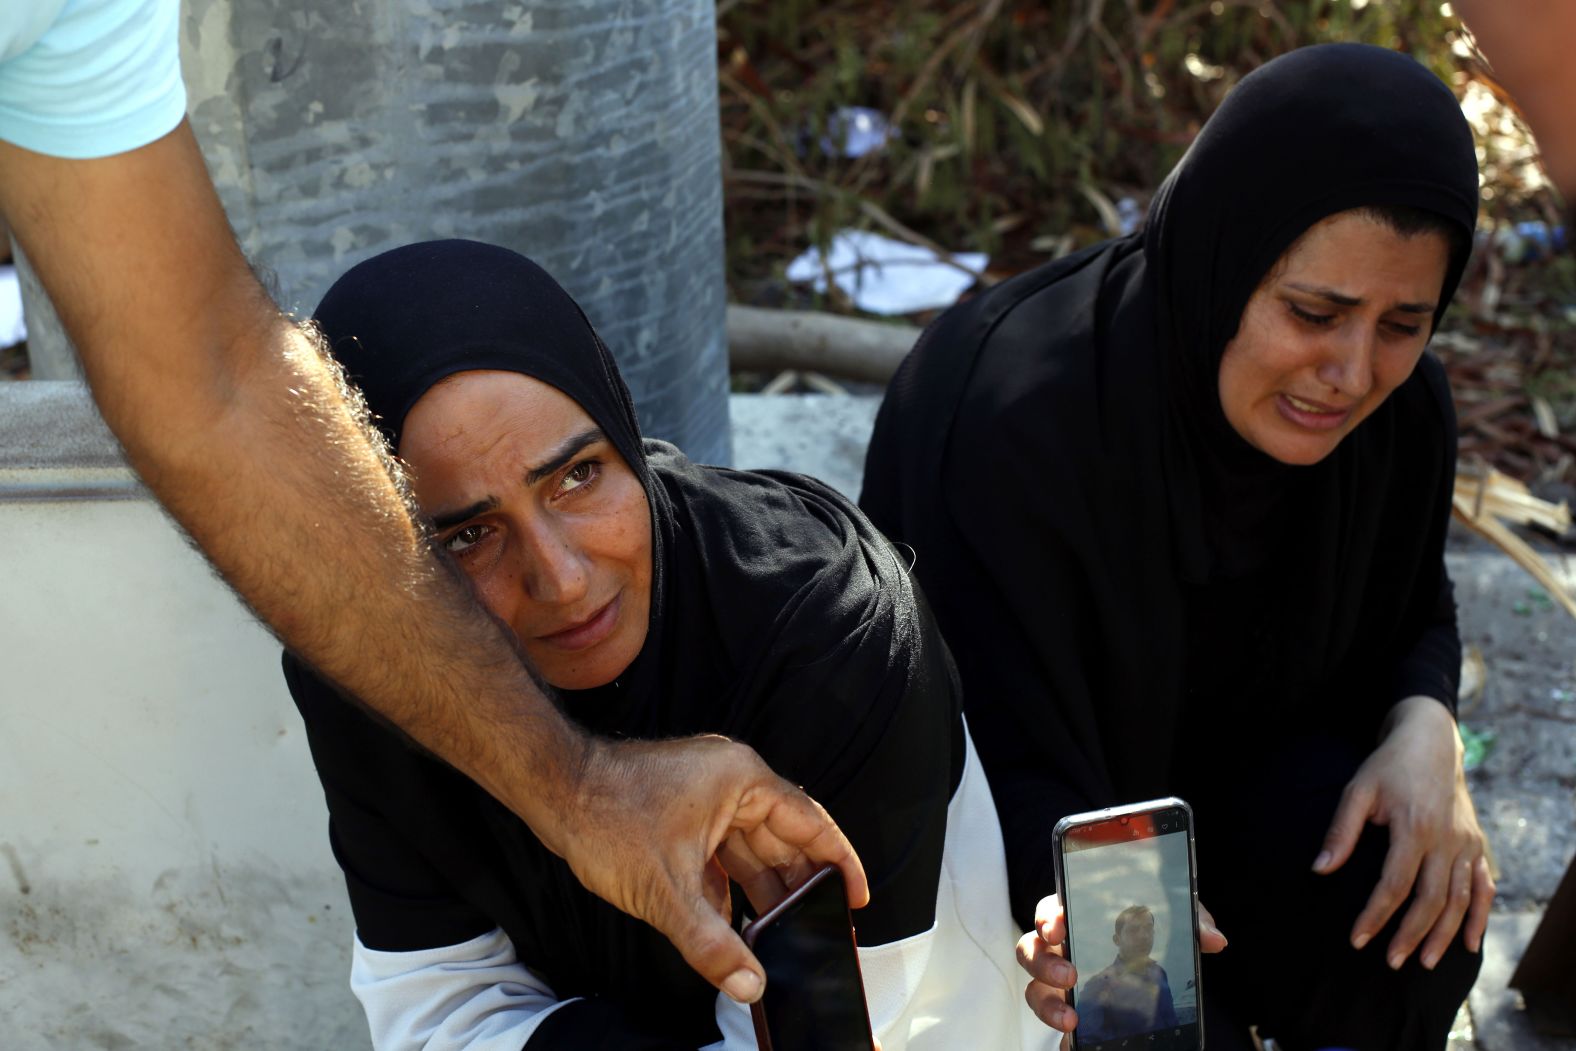 A woman and her sister-in-law show a photo of a missing man on August 7, 2020. Many people were reported missing after the explosion.